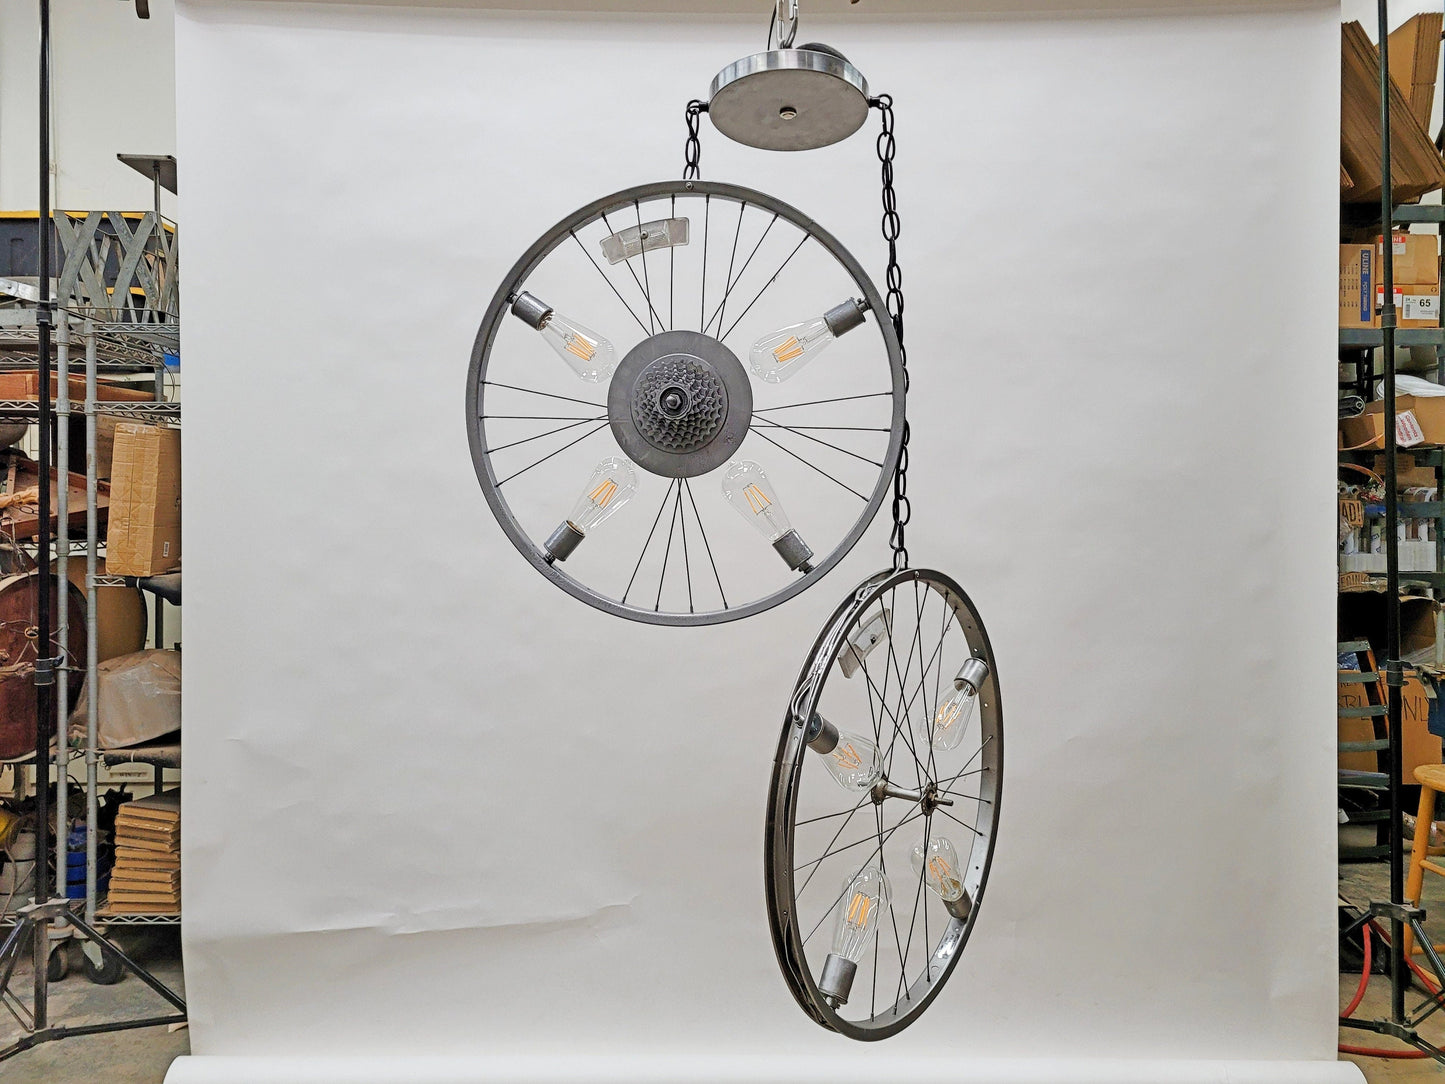 Bike Wheel Chandelier - Too Tired - Made from retired California Bicycle Rims - 100% Recycled!